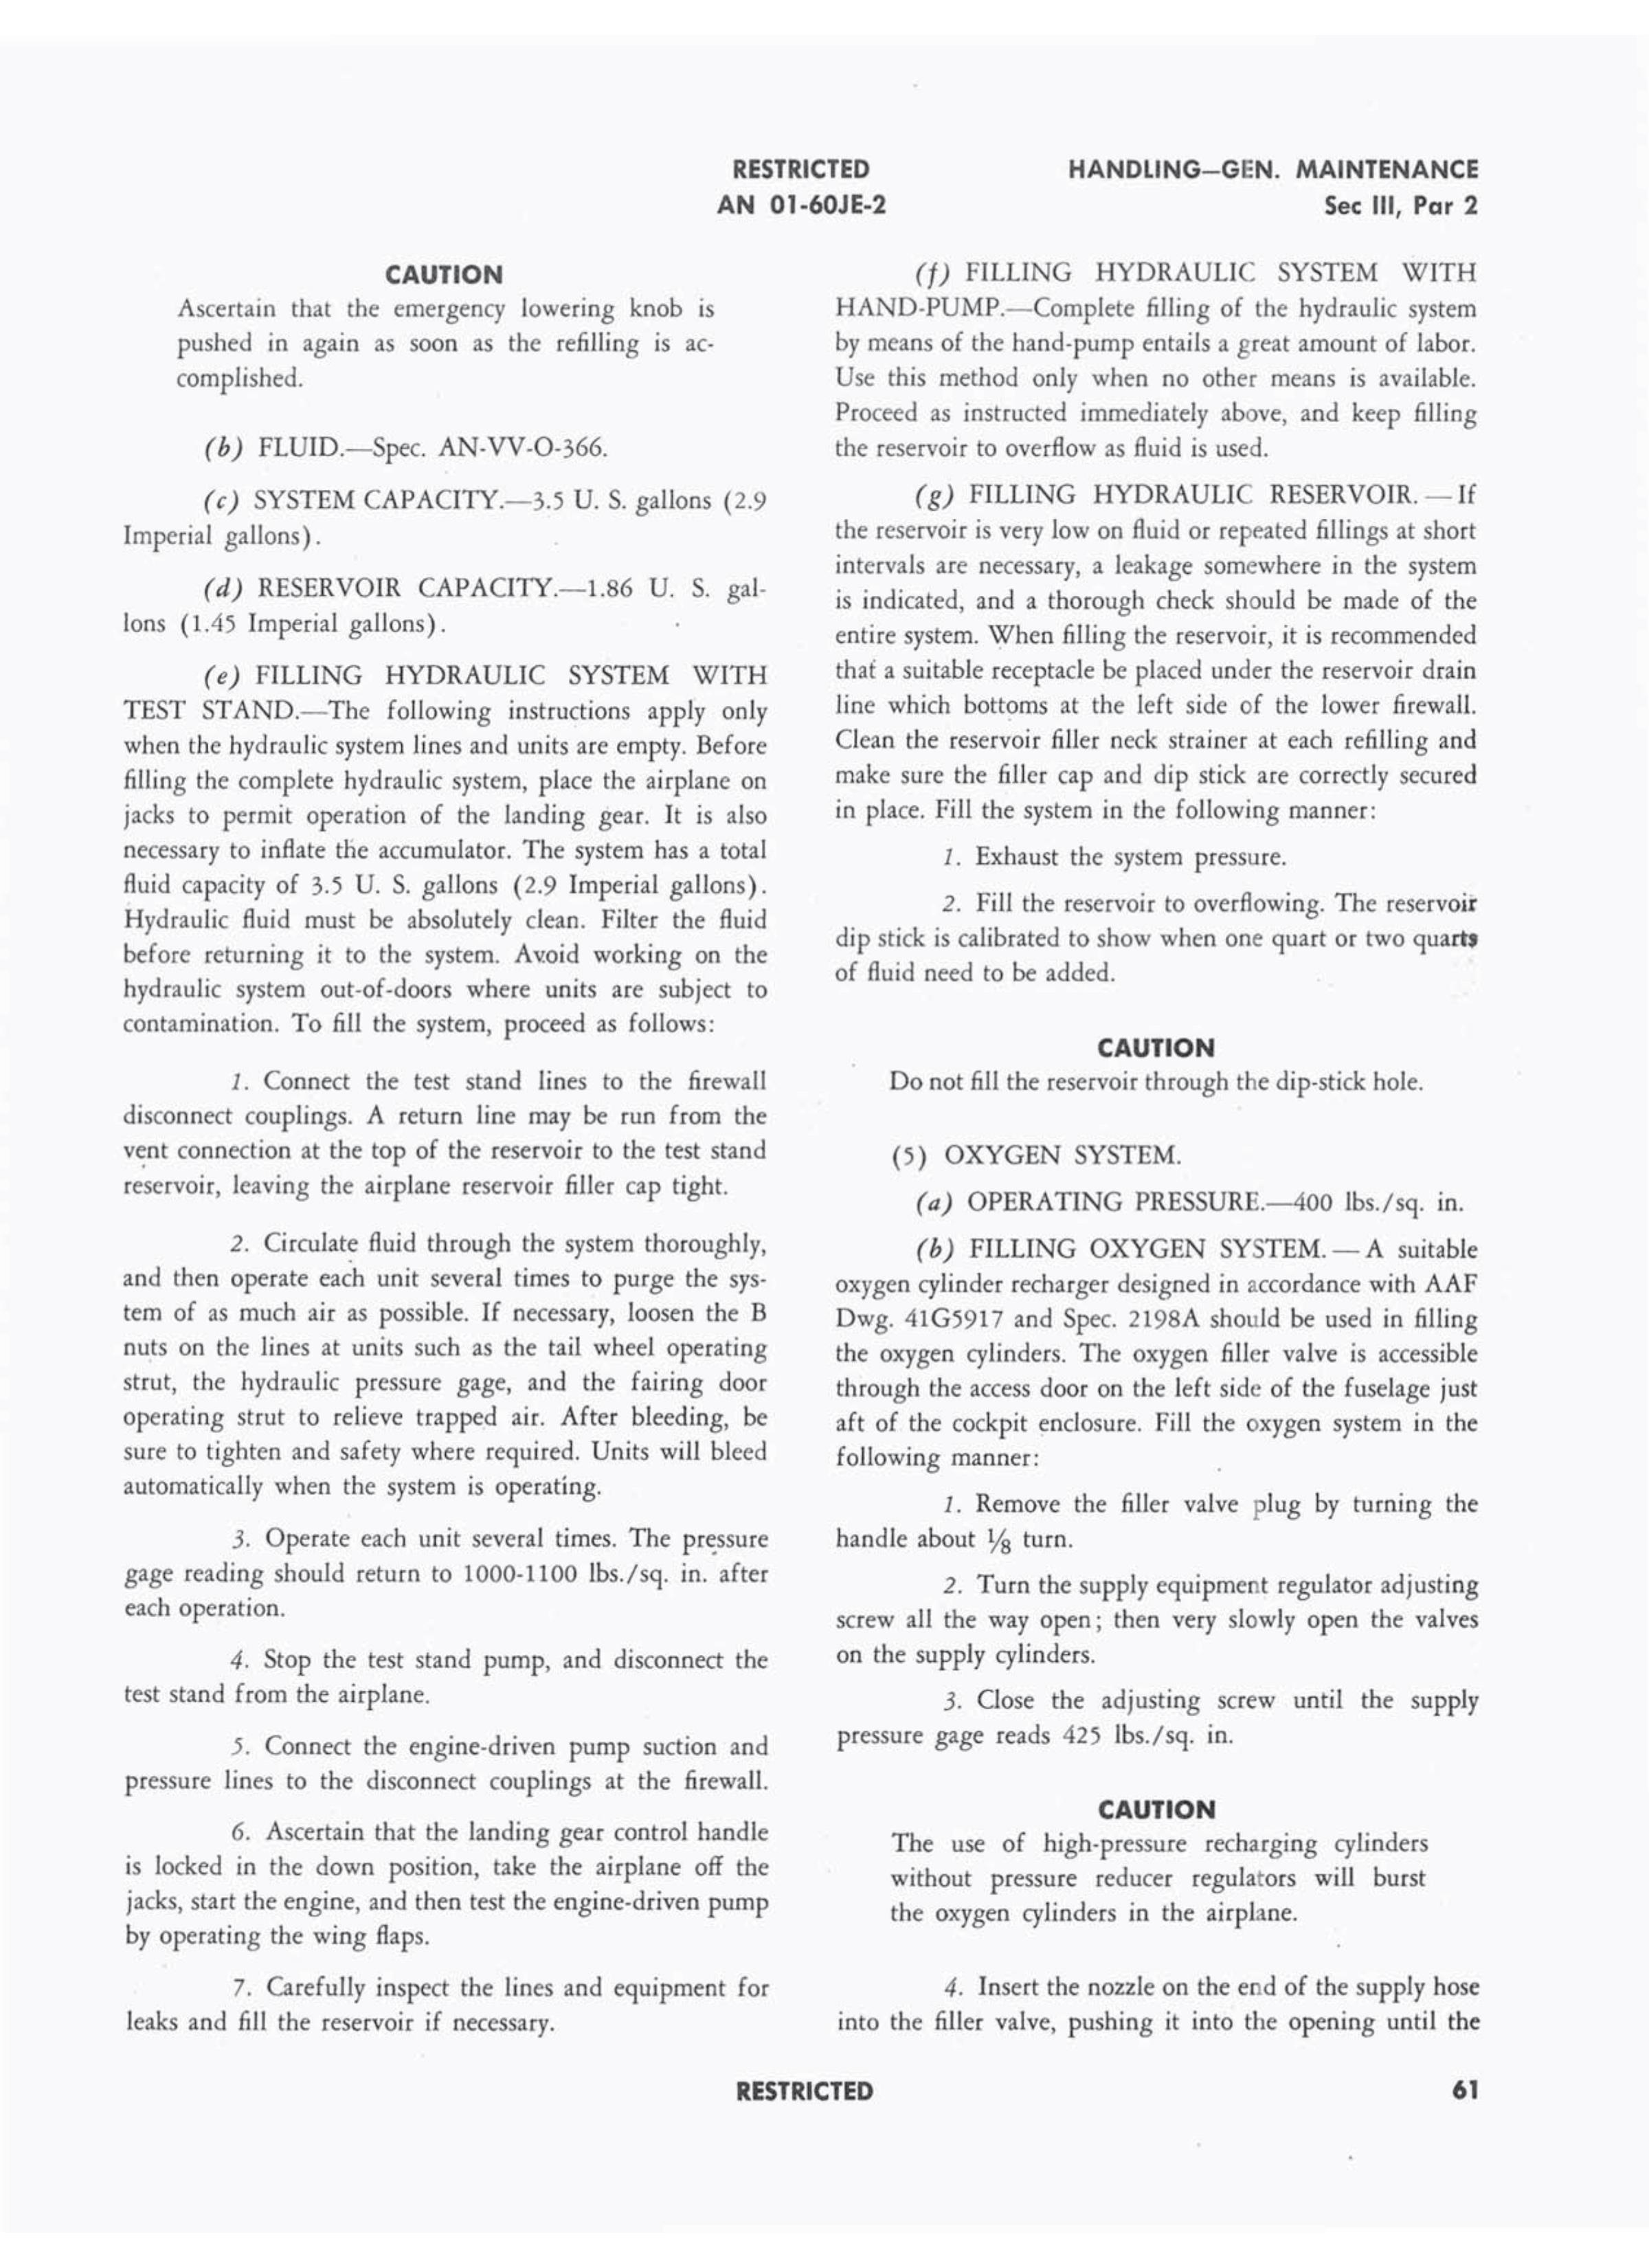 Sample page 65 from AirCorps Library document: Erection & Maintenance - P-51D-5